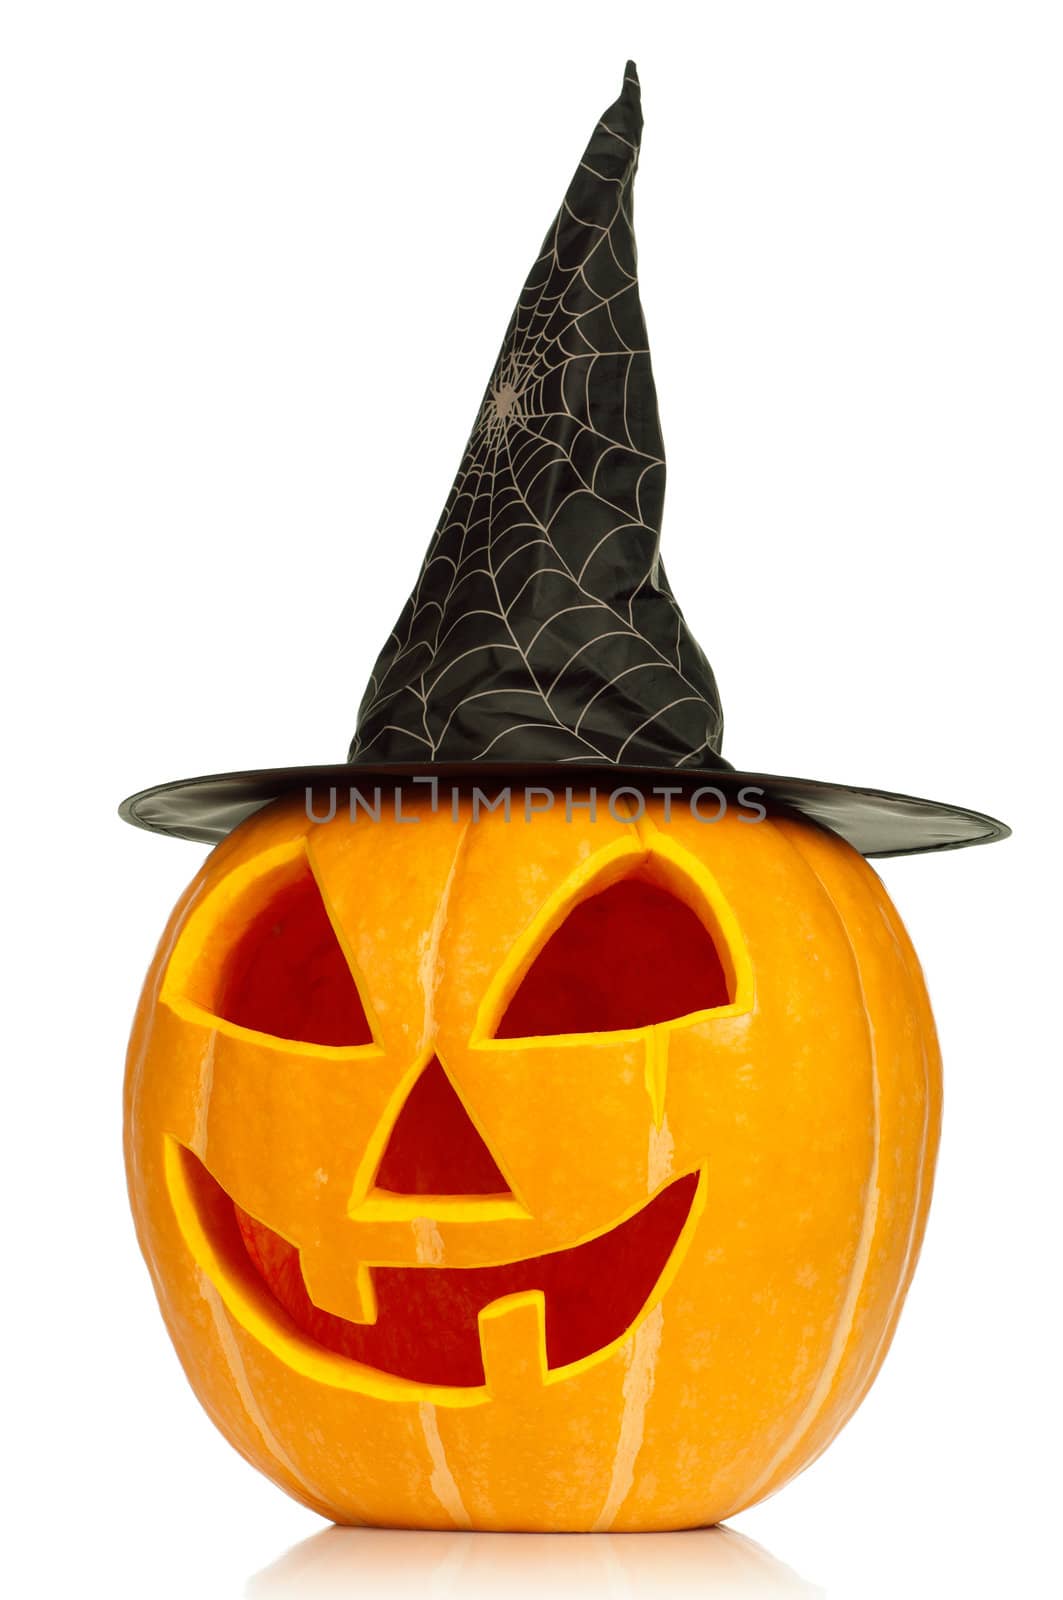 Funny Halloween pumpkin with black hat isolated on white background